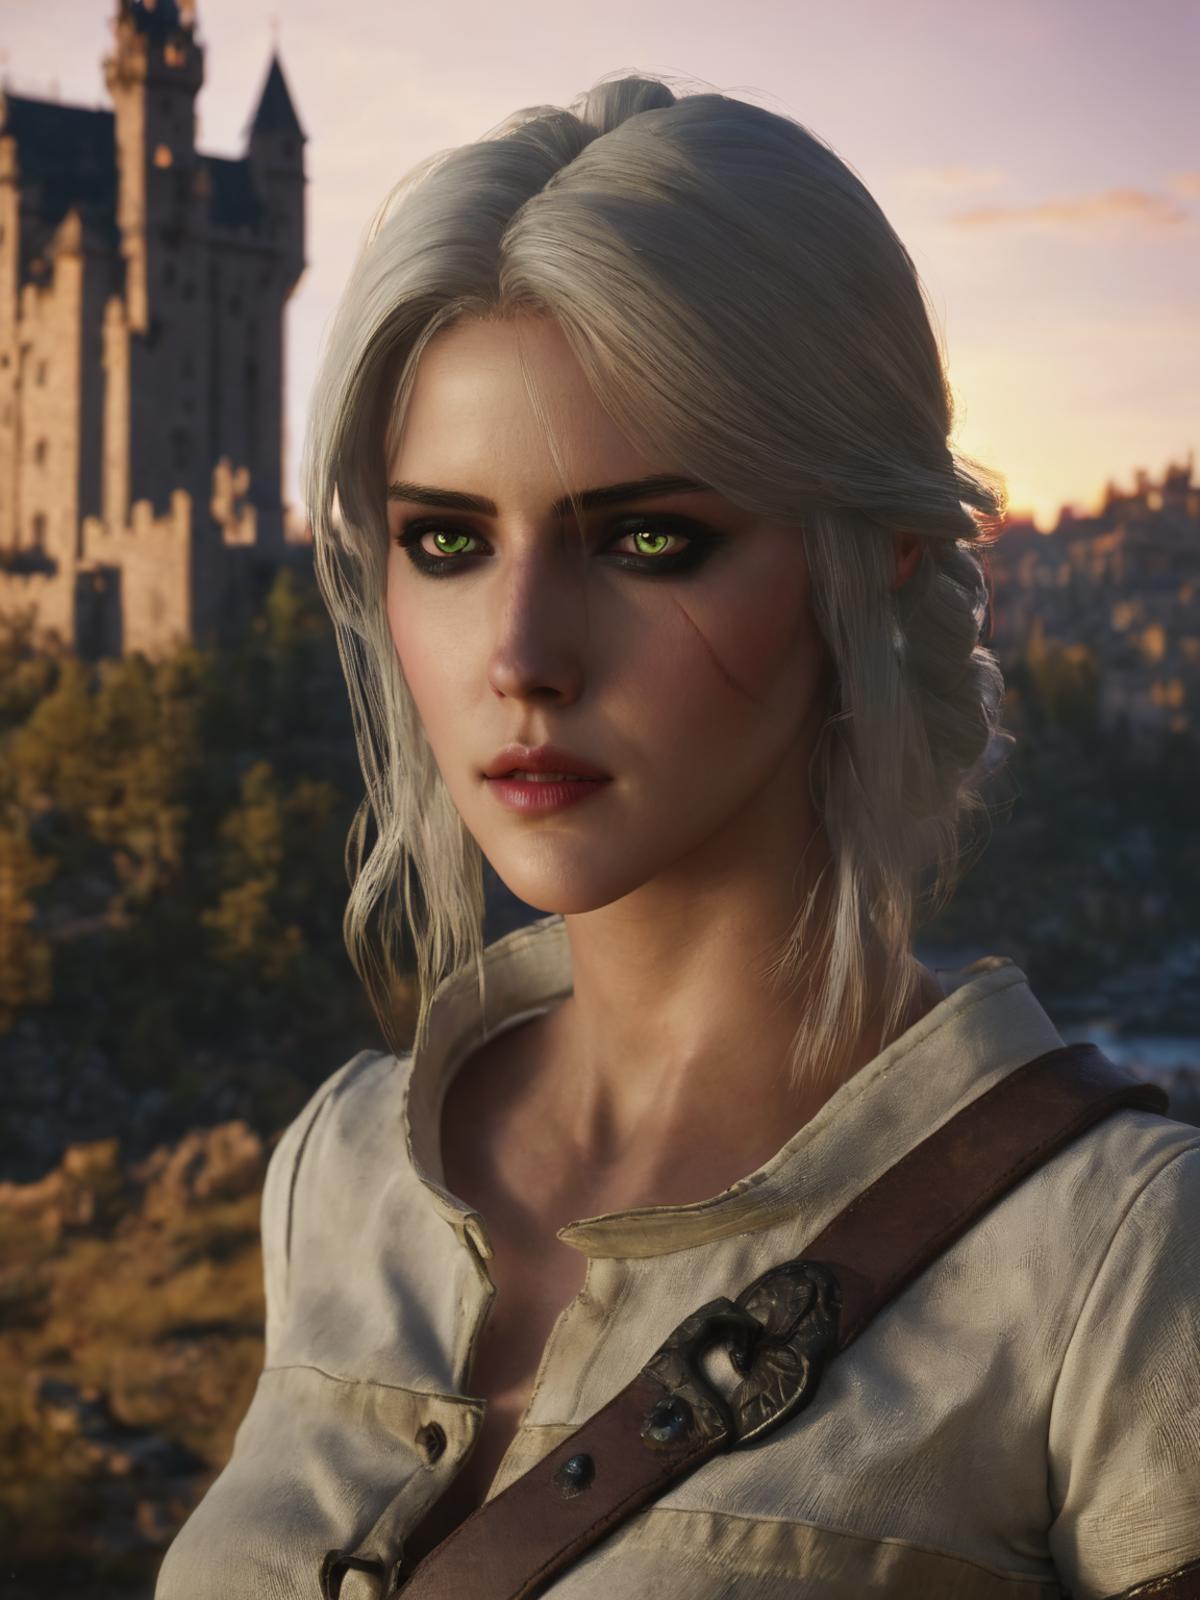 Ciri (Witcher 3 Game) SDXL image by echo_cipher